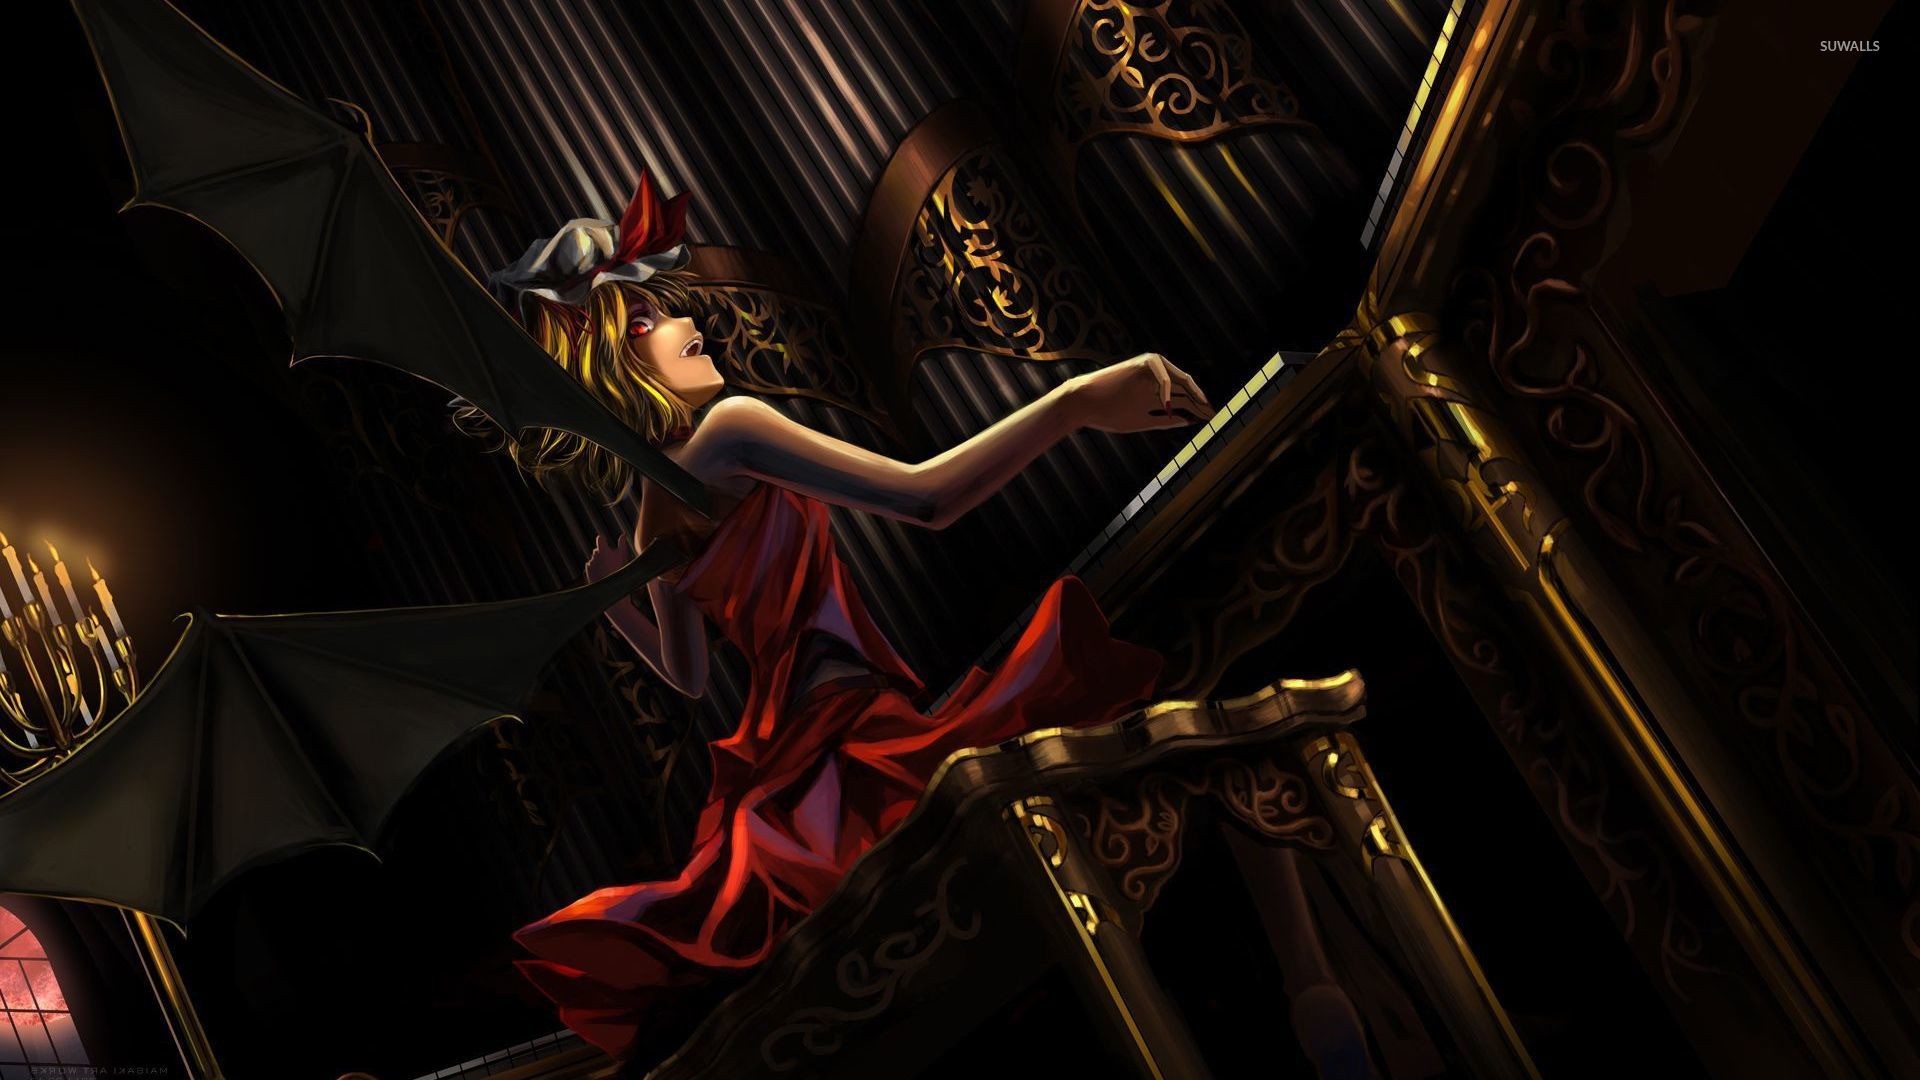 Flandre Scarlet at the piano   Touhou Project wallpaper